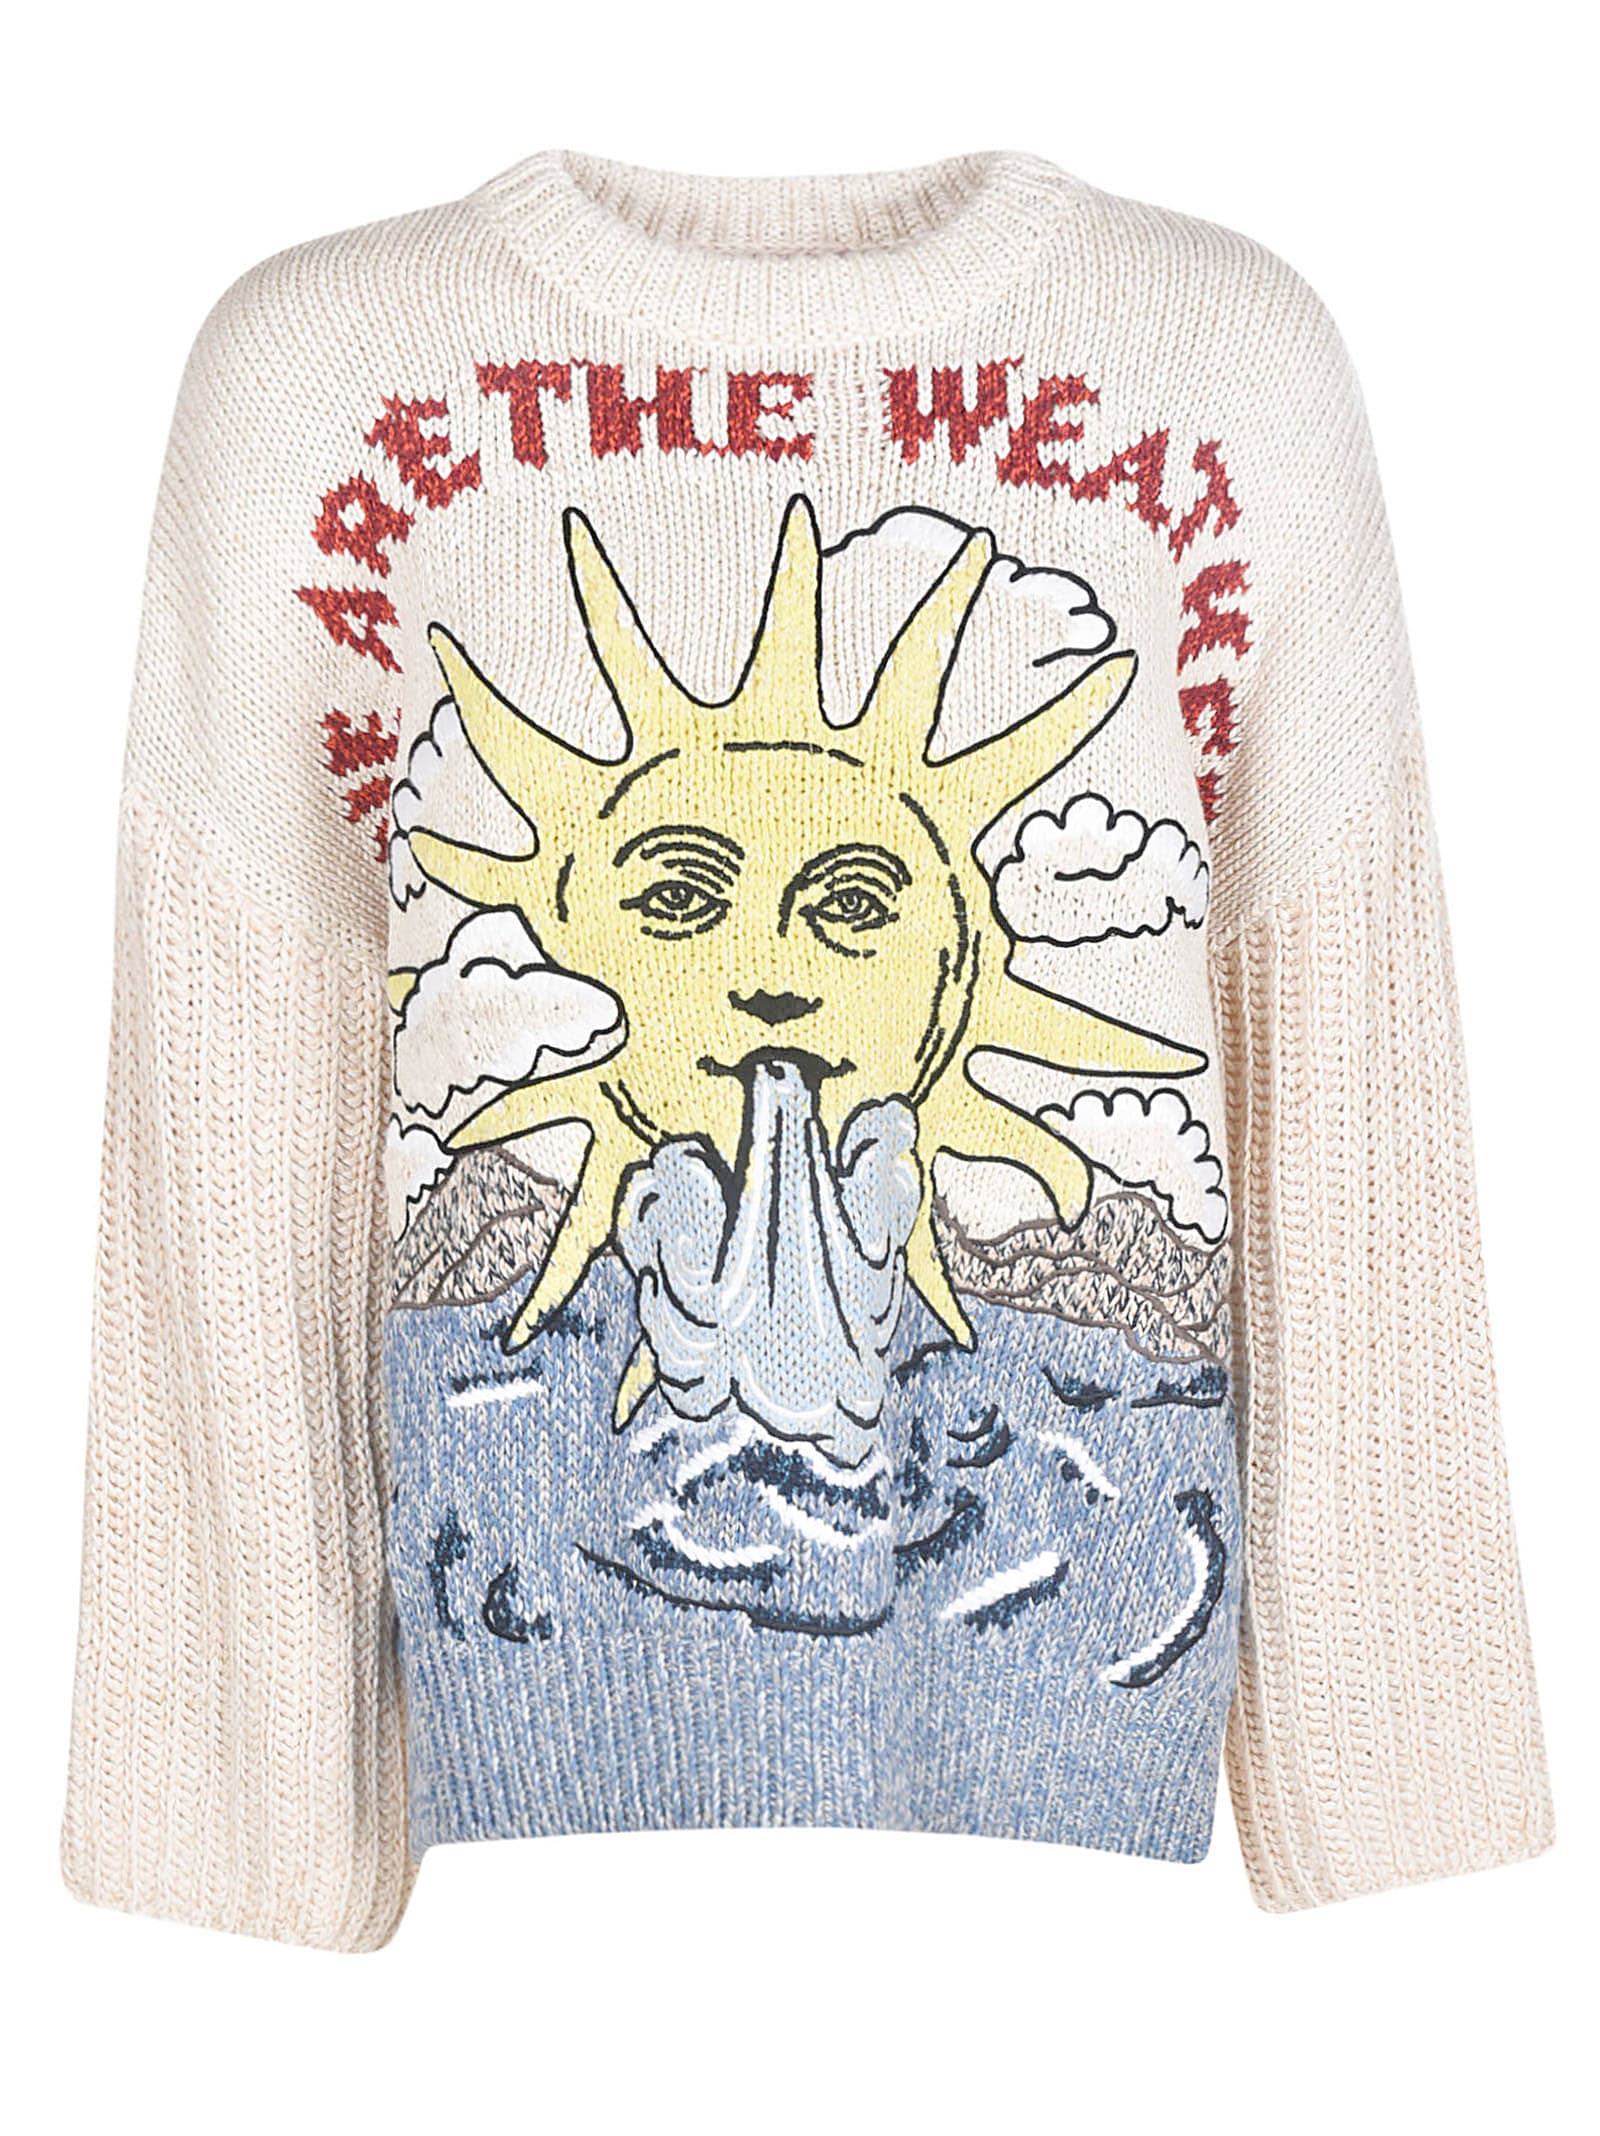 STELLA MCCARTNEY WE ARE THE WEATHER jumper,11260837